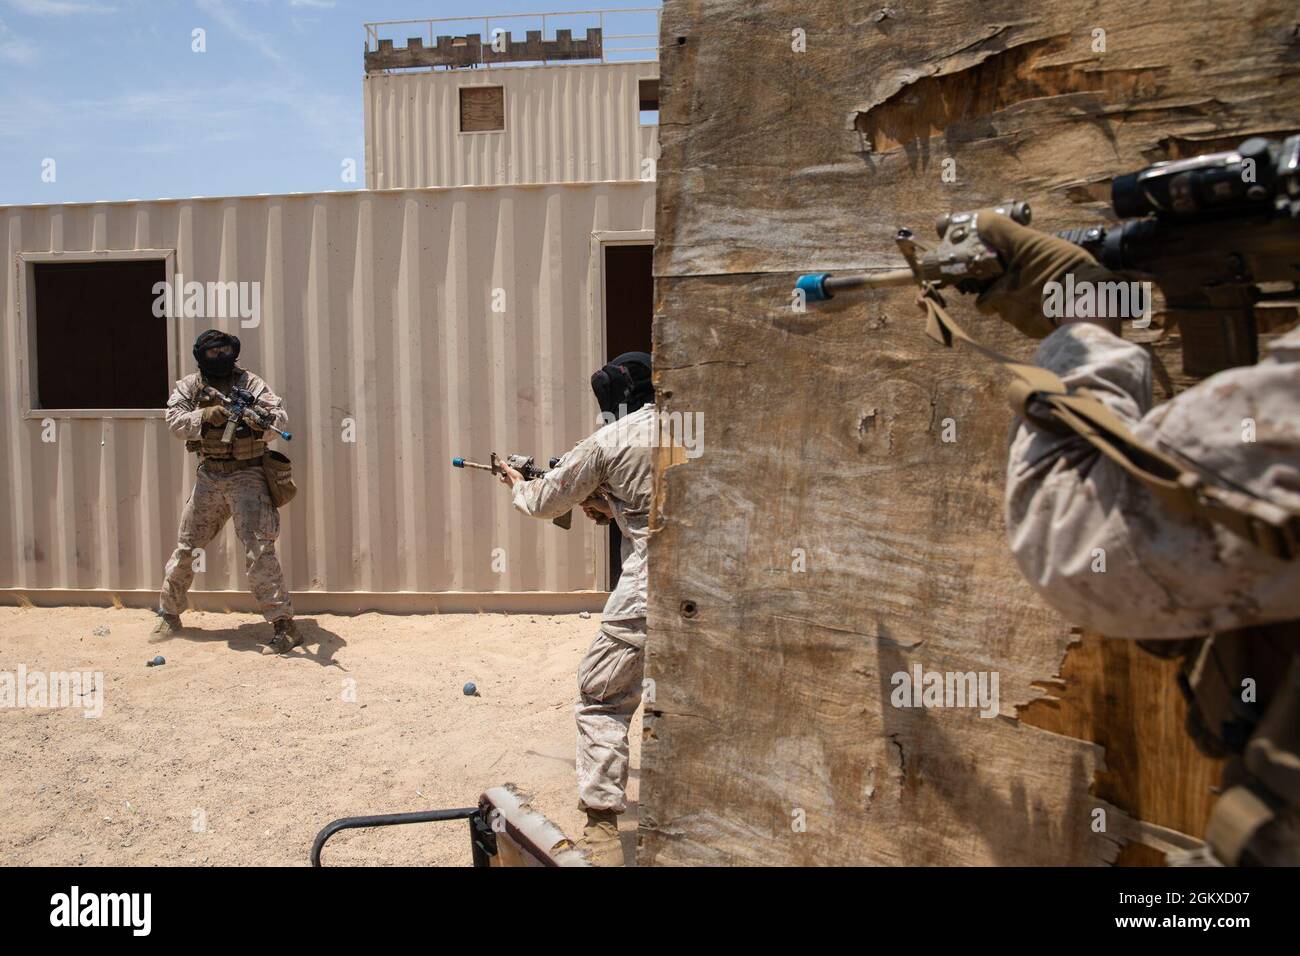 A U.S. Marines with Co. L, 3rd Battalion, 4th Marine Regiment, 1st Marine Division, aims at simulated enemies during urban defensive training at Marine Corps Air Ground Combat Center Twentynine Palms, California, July 17, 2021. Marines with 7th Marine Regiment participated in various training exercises to compete for ‘best squad’ in preparation for Super Squad. Stock Photo